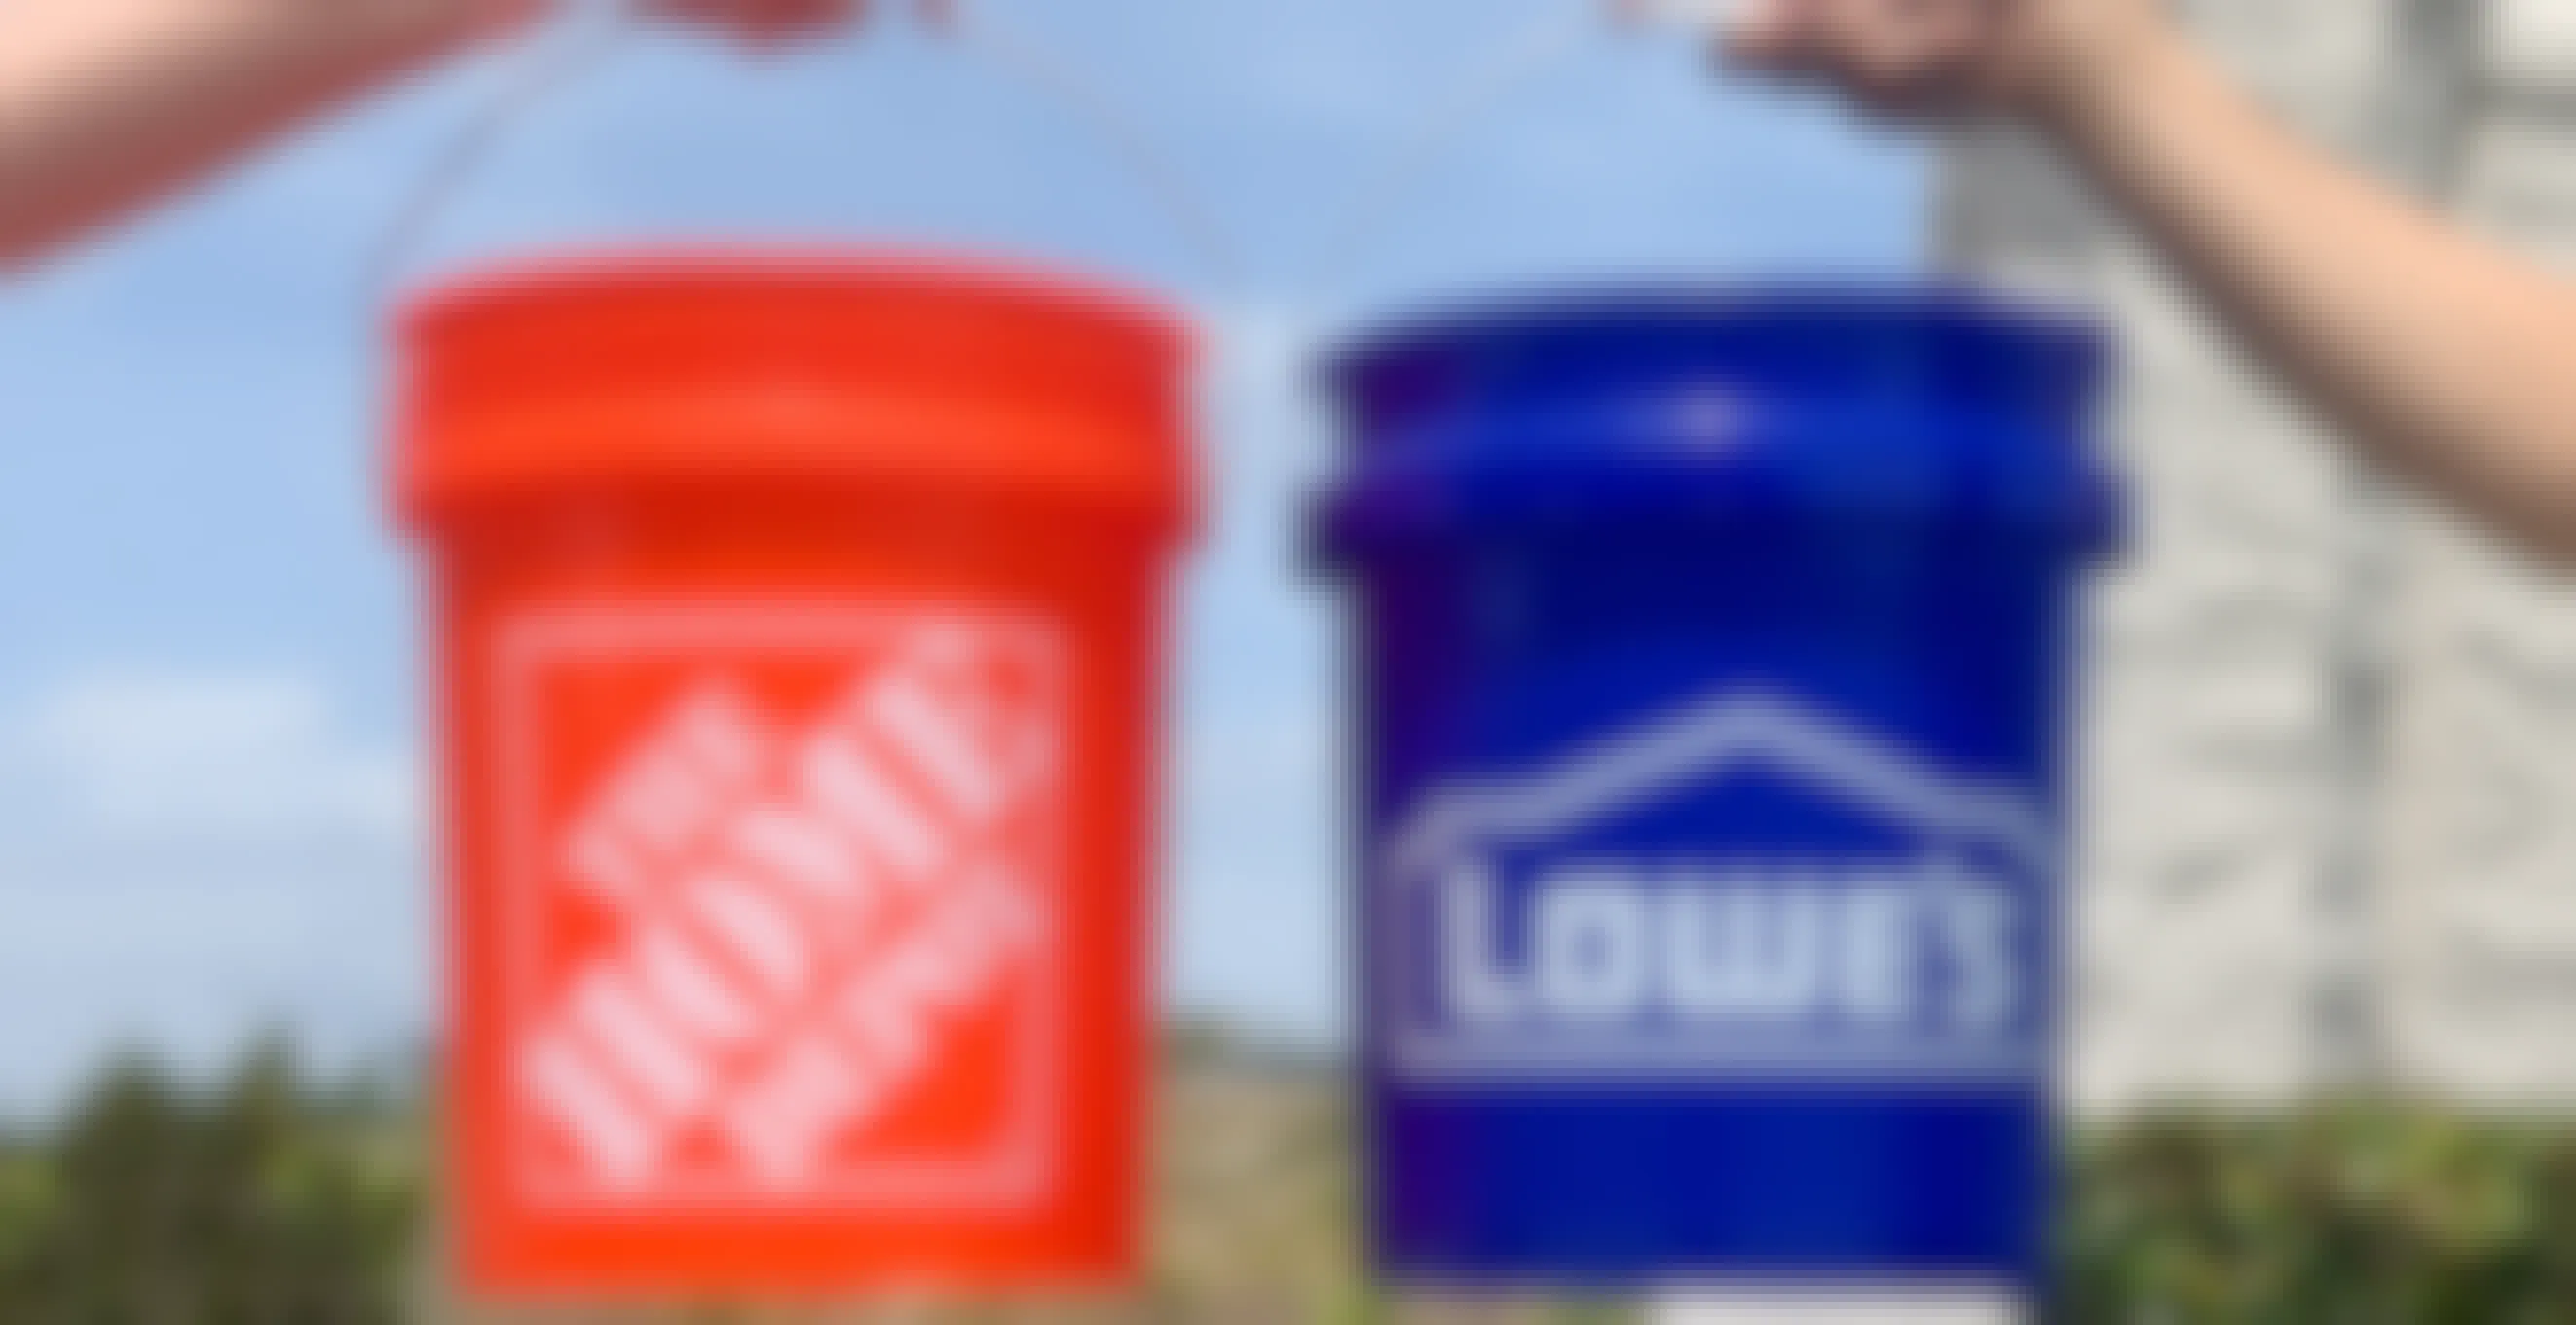 Lowe's vs. Home Depot: Who Actually Has Cheaper Prices?